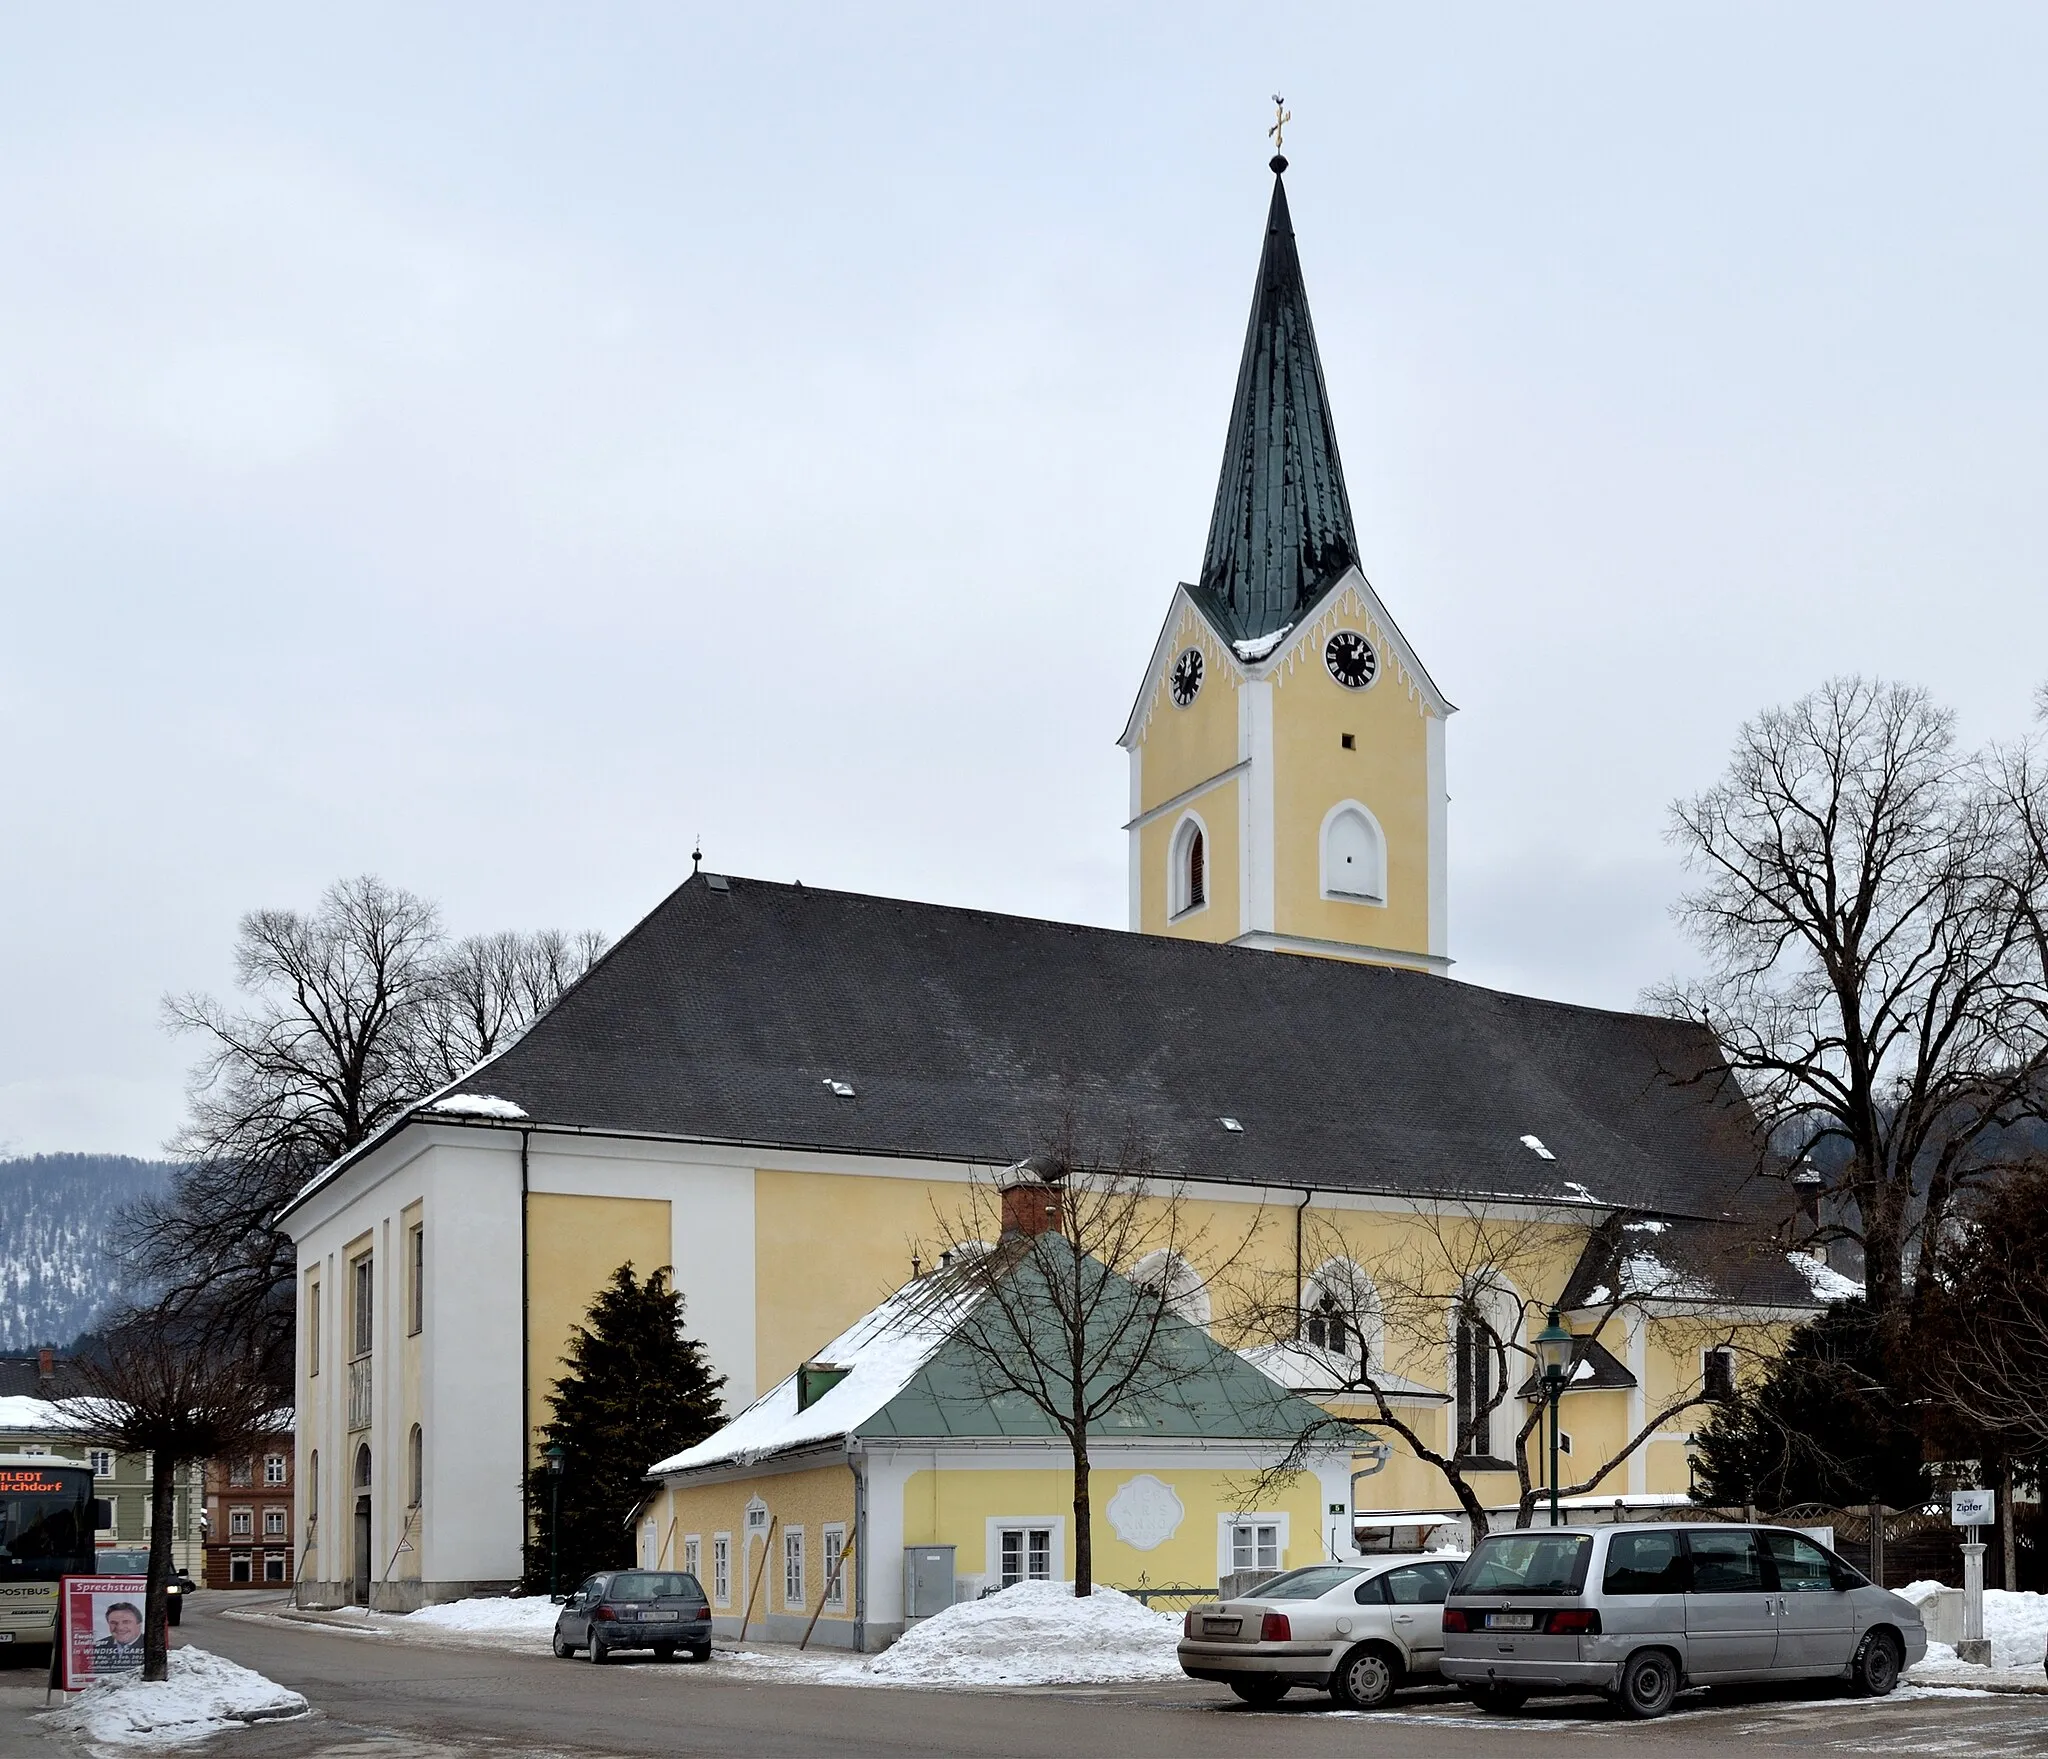 Photo showing: The parish church Saint Jacob in Windischgarten, Upper Austria is protected as cultural heritage monuments. Full exterior view.